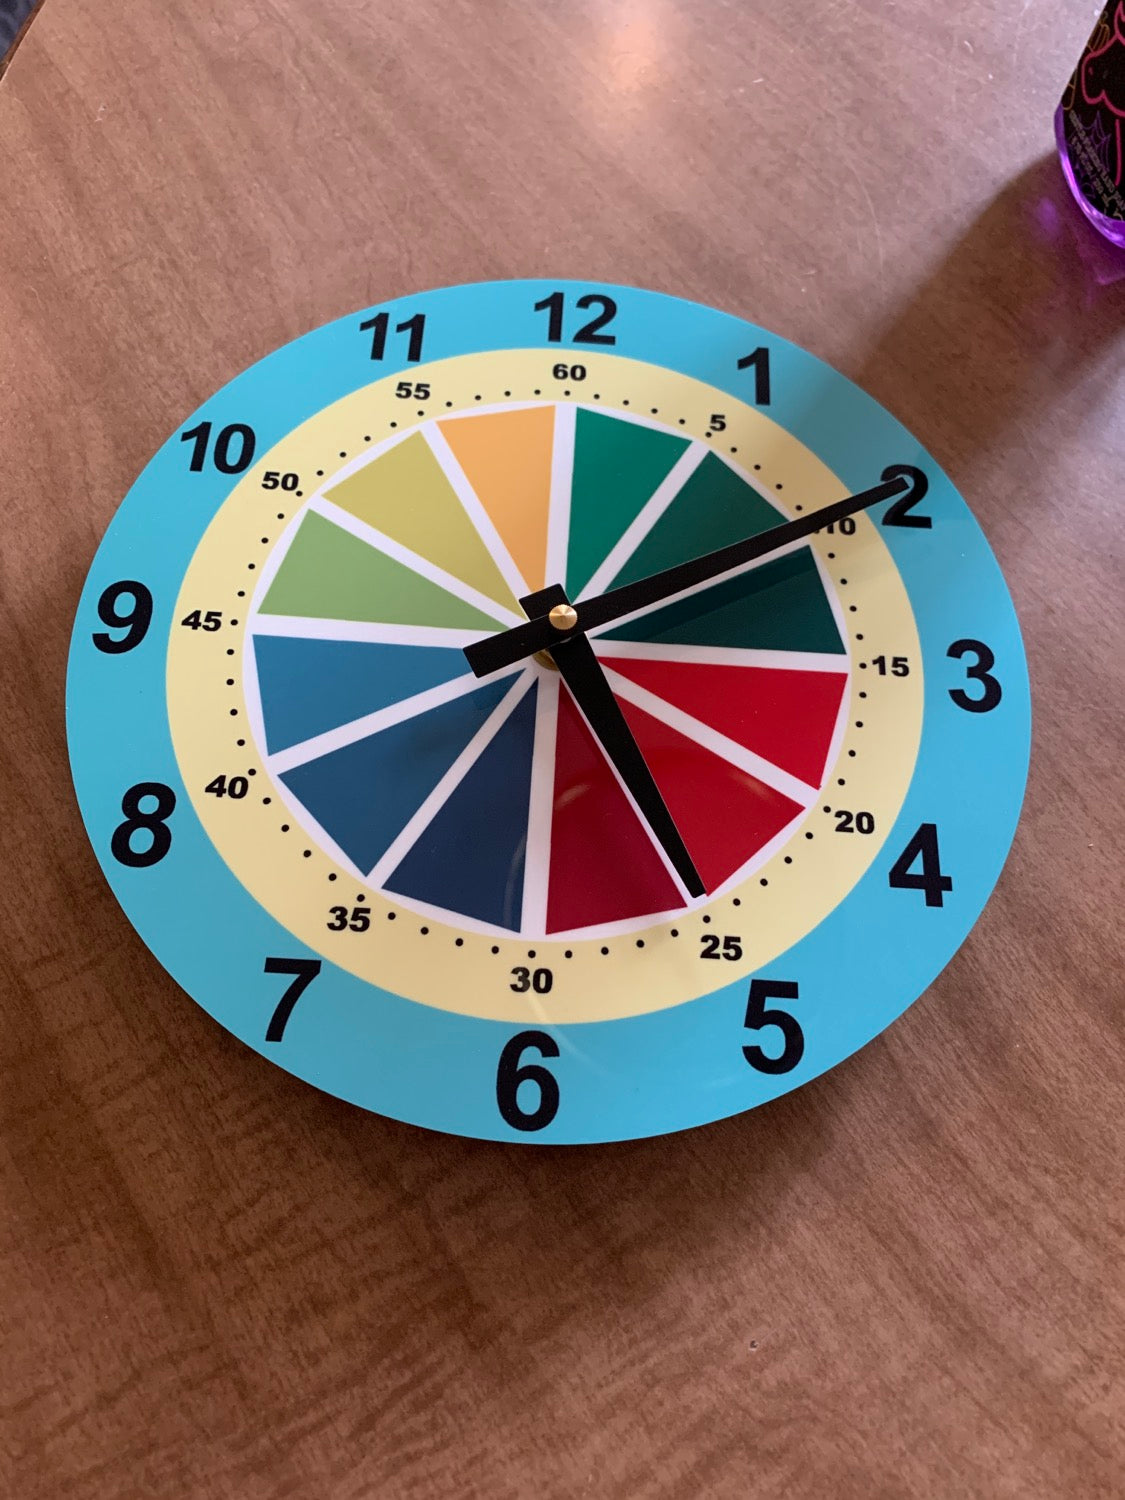 Personalized Clock - 8" Round Full Color